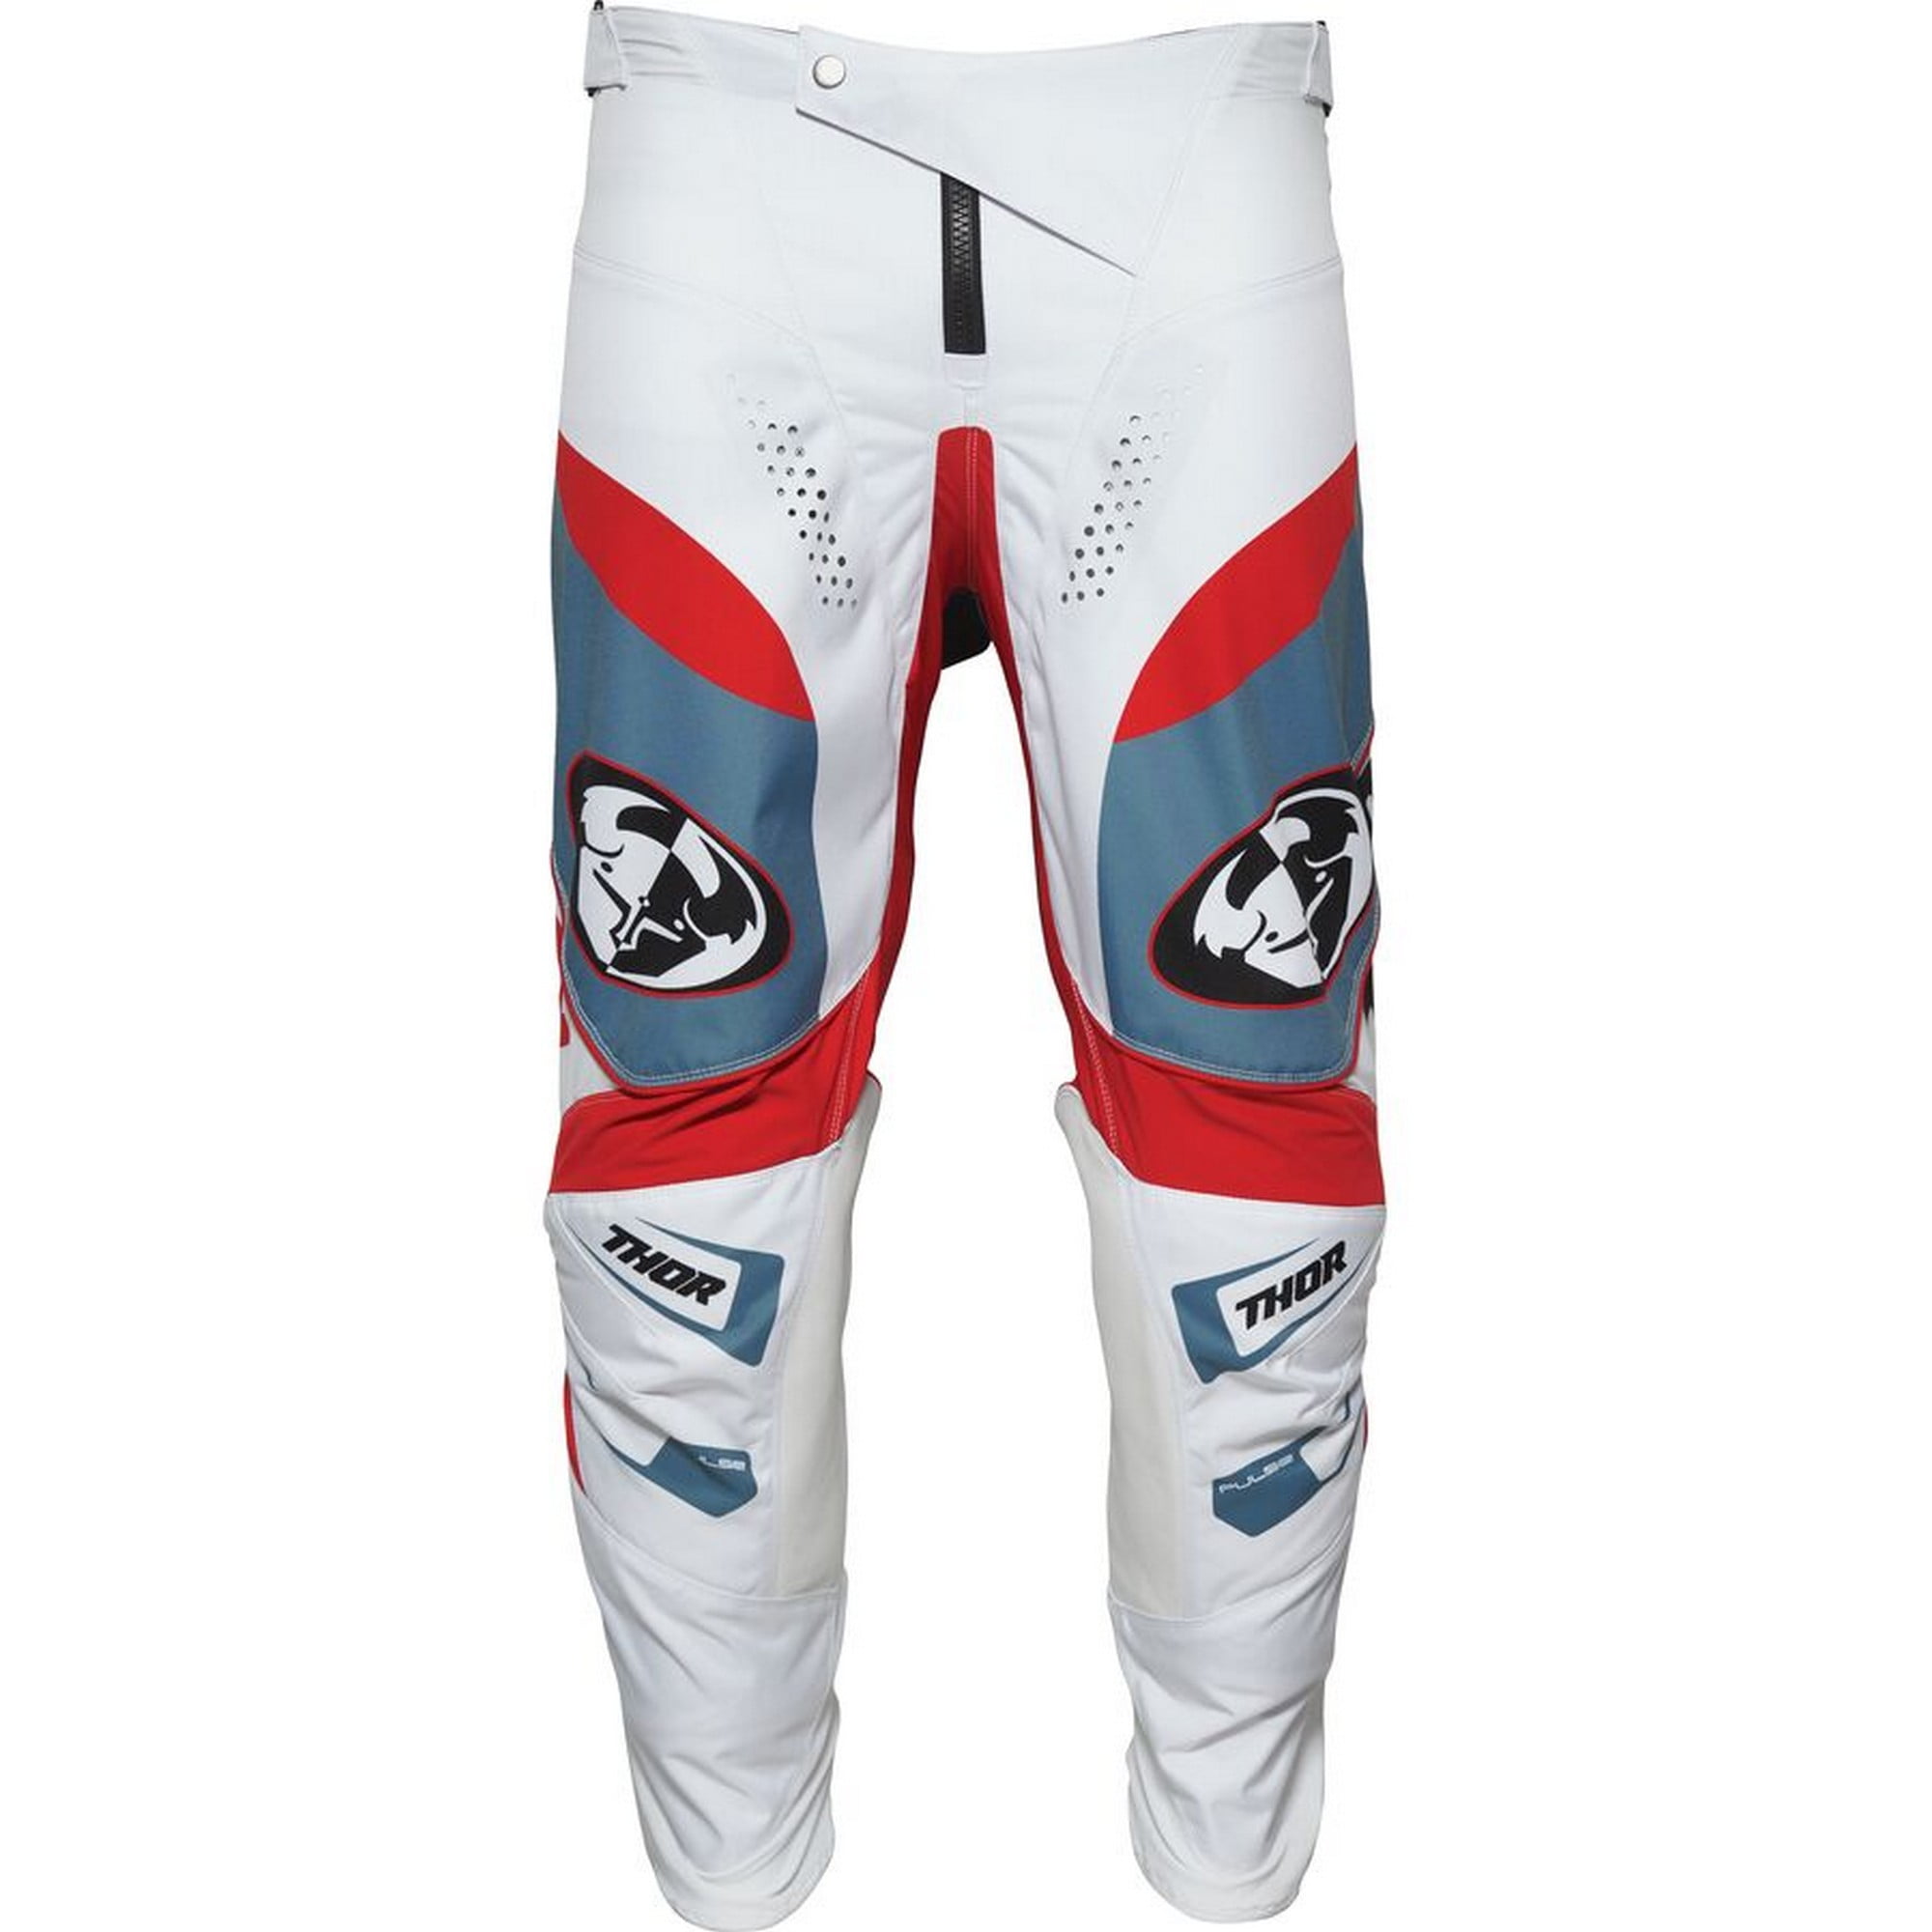 2021 Thor Pulse Hzrd MX Motocross Offroad Pants Pick Size & Color 